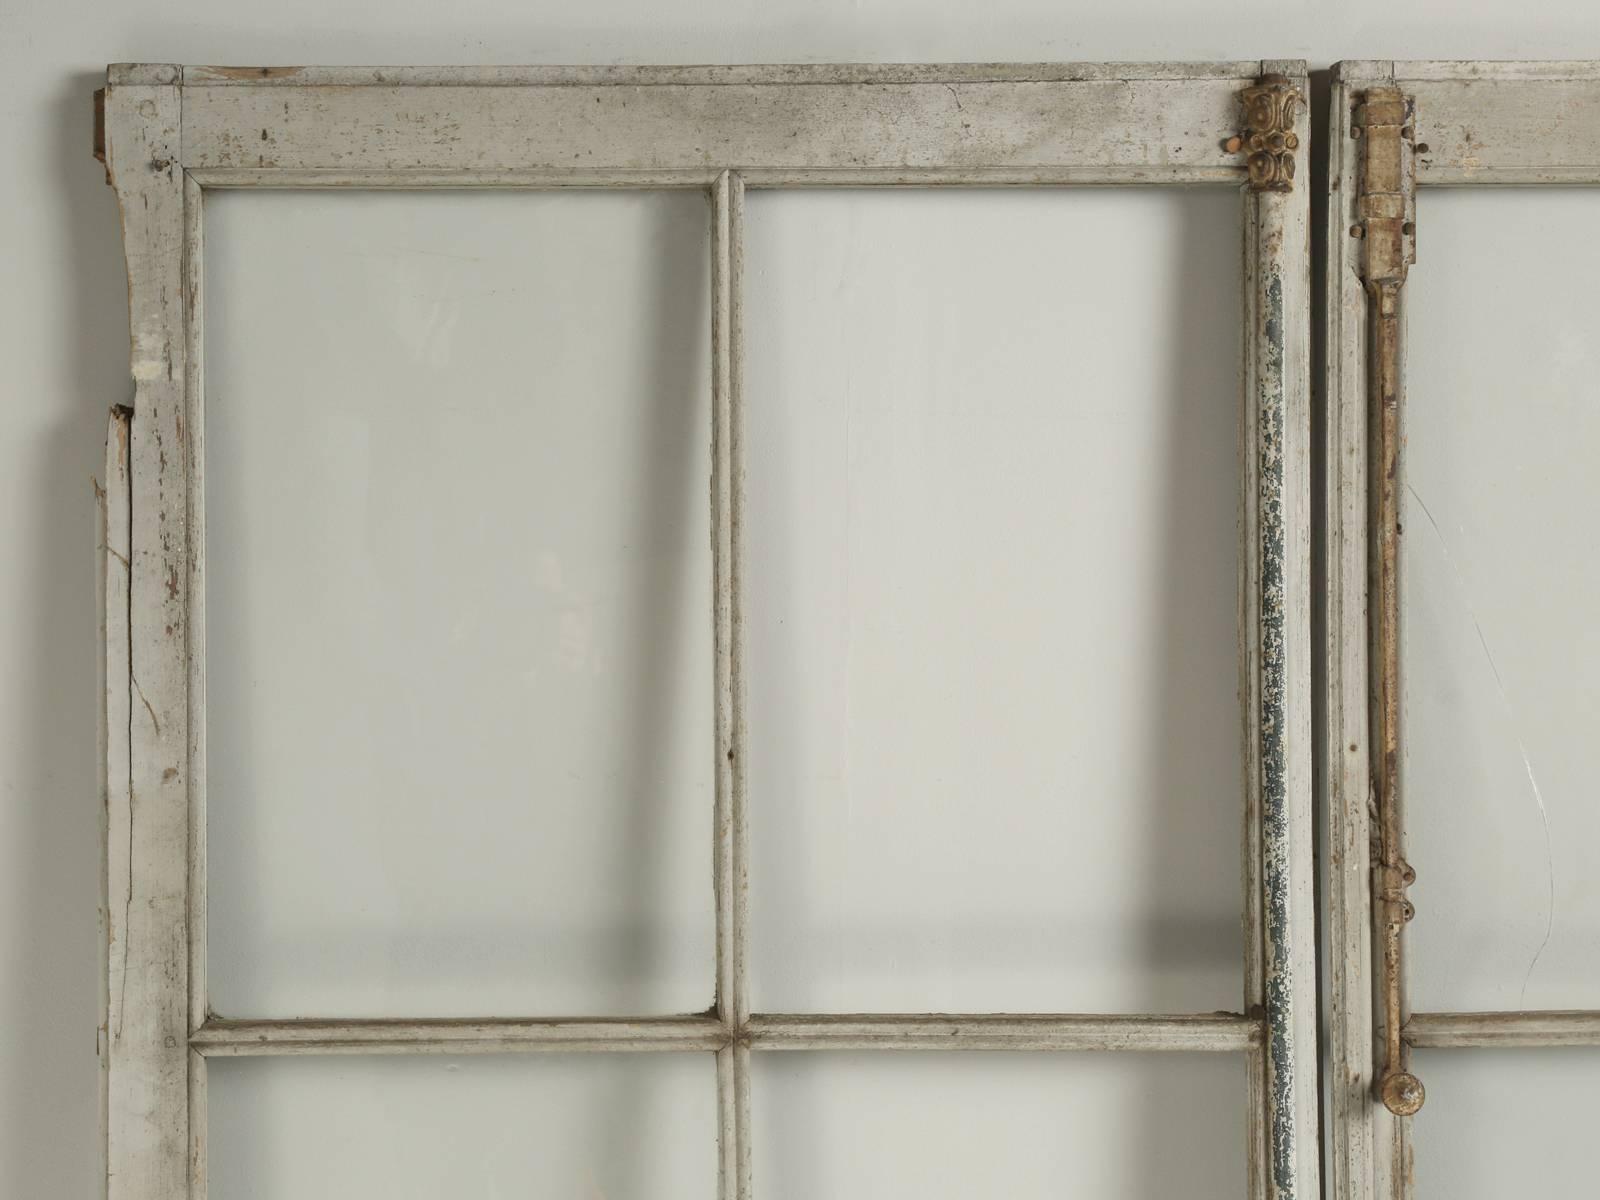 Wonderful pair of extremely tall at 9’ 5” antique French doors in their original paint. We have not touched the doors, other than to clean the glass and lightly brush off the dust from decades of storage in the south of France. Please note, there